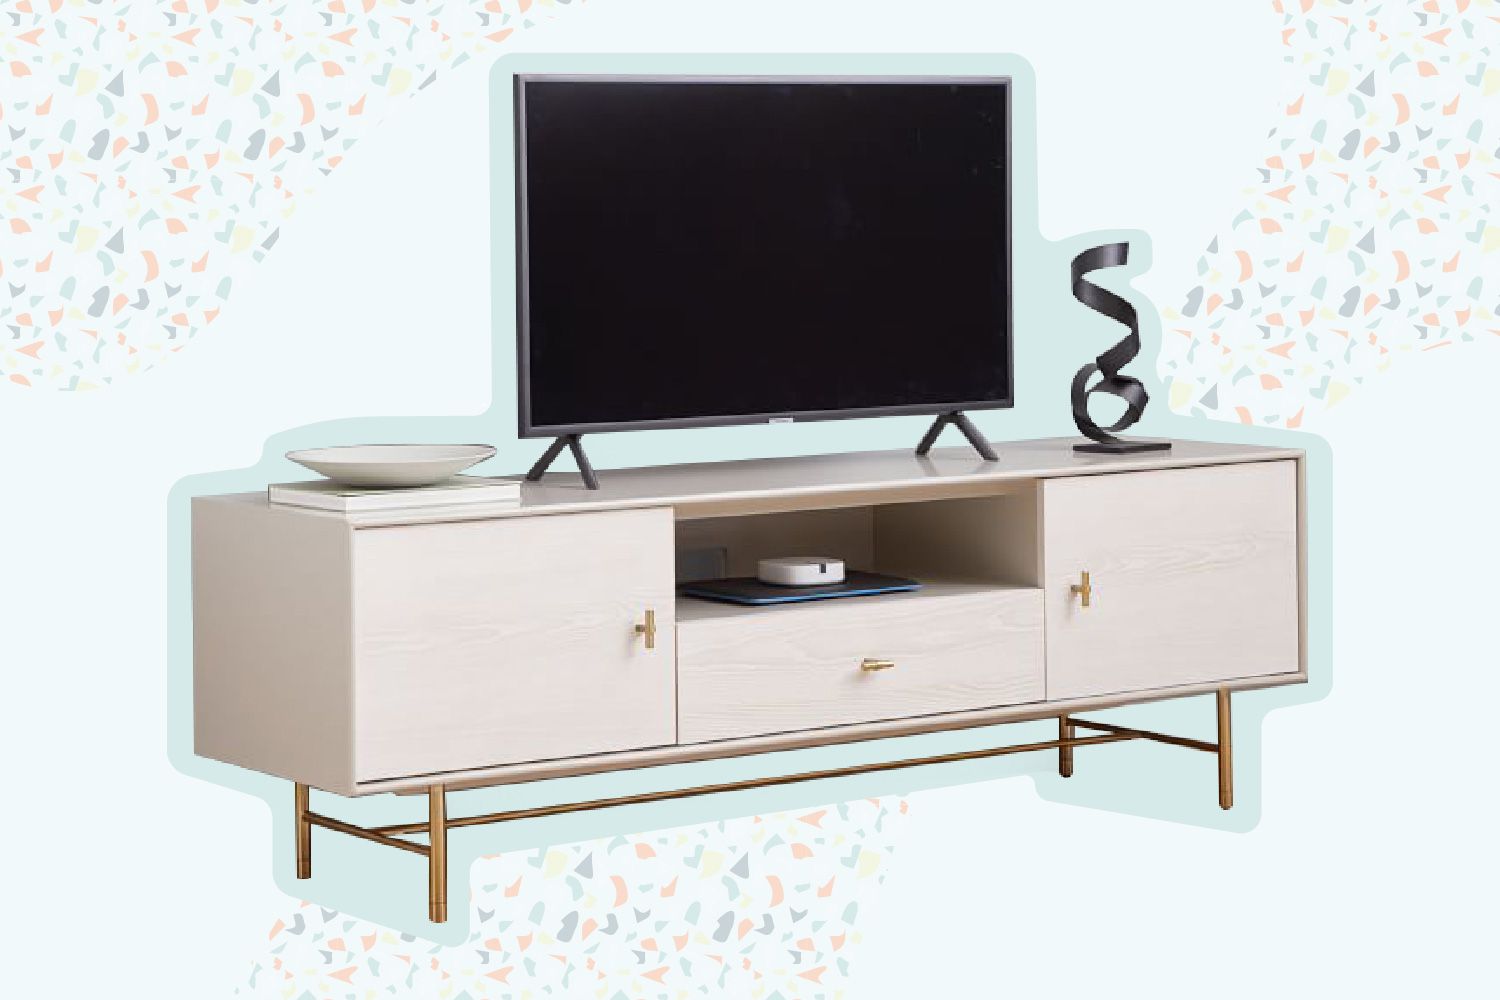 8 Best TV Stands That Anchor the Room